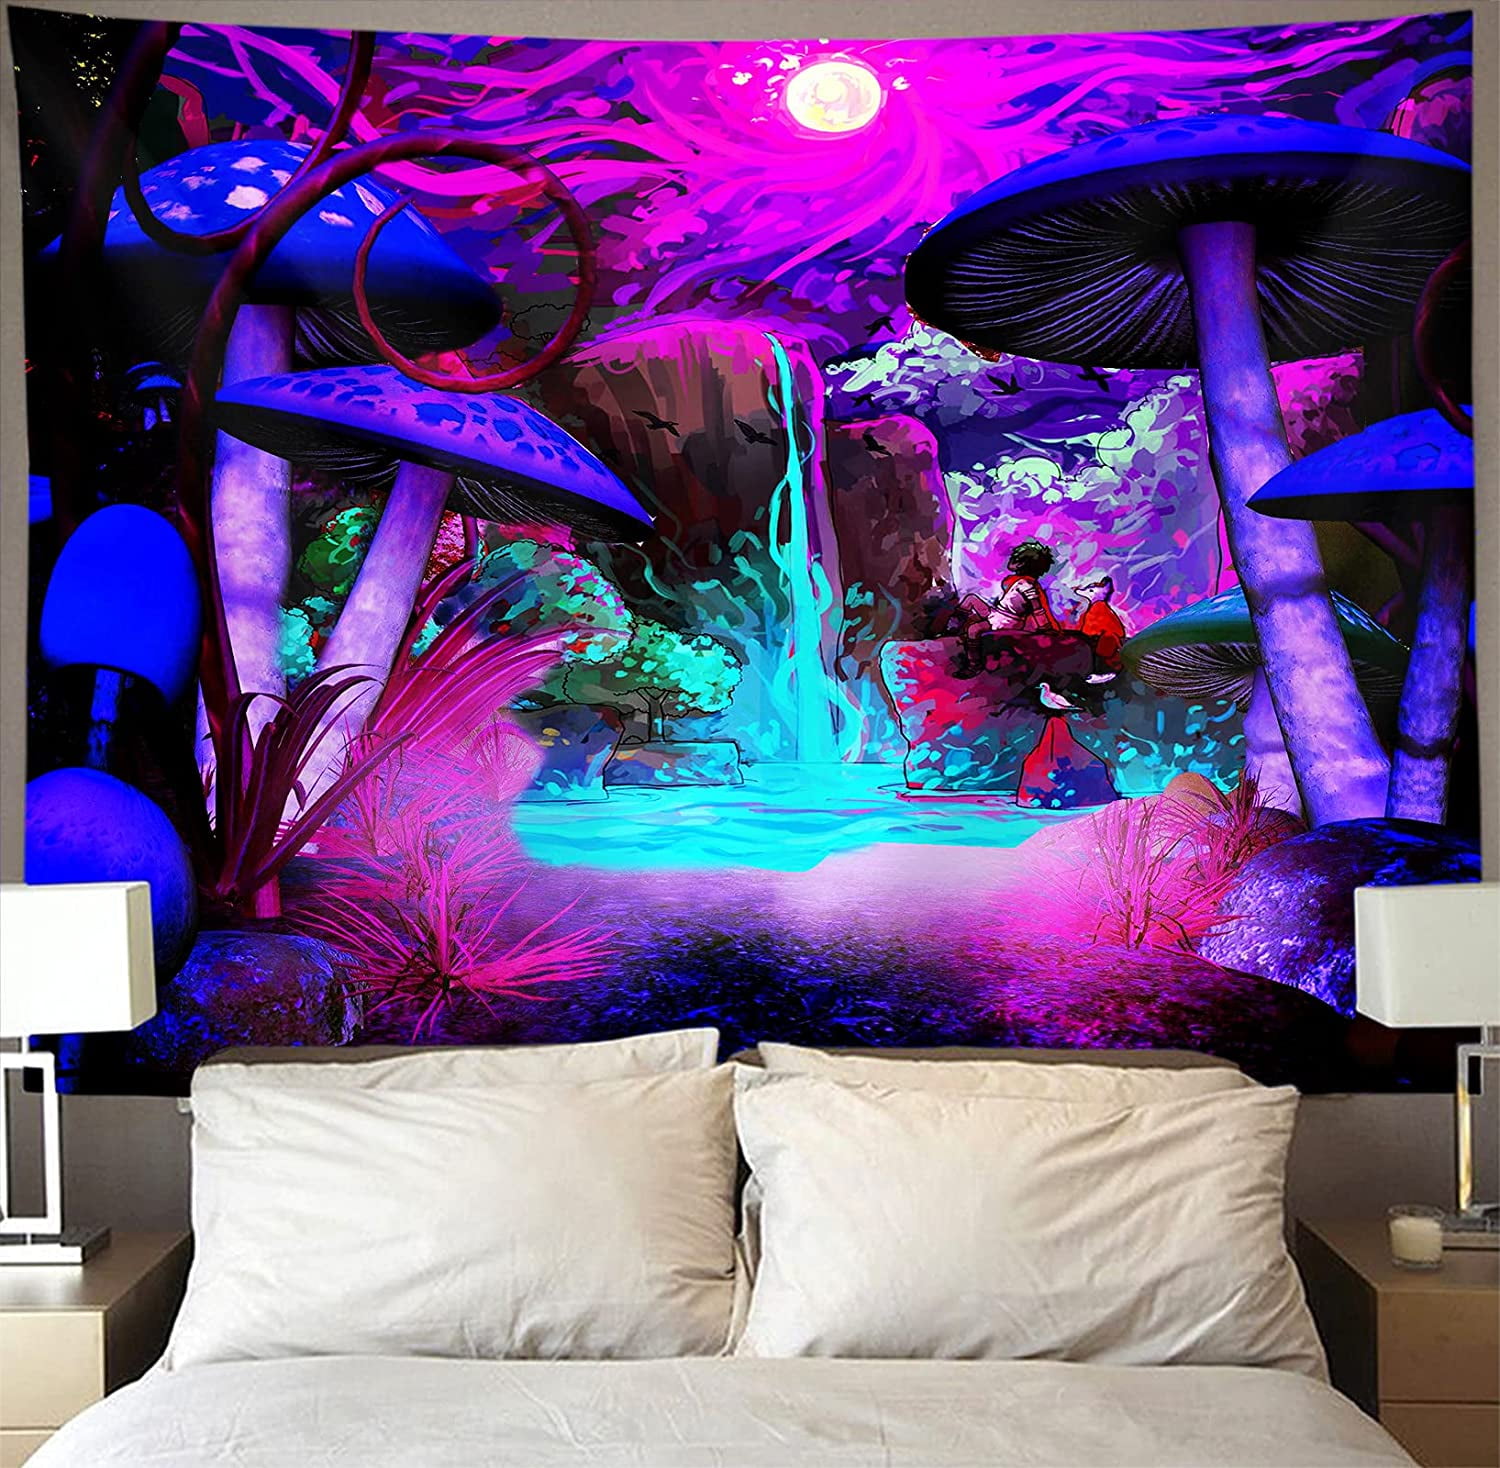 Black Colorful Wall Hanging Tapestry Psychedelic Bedroom Home Decoration 